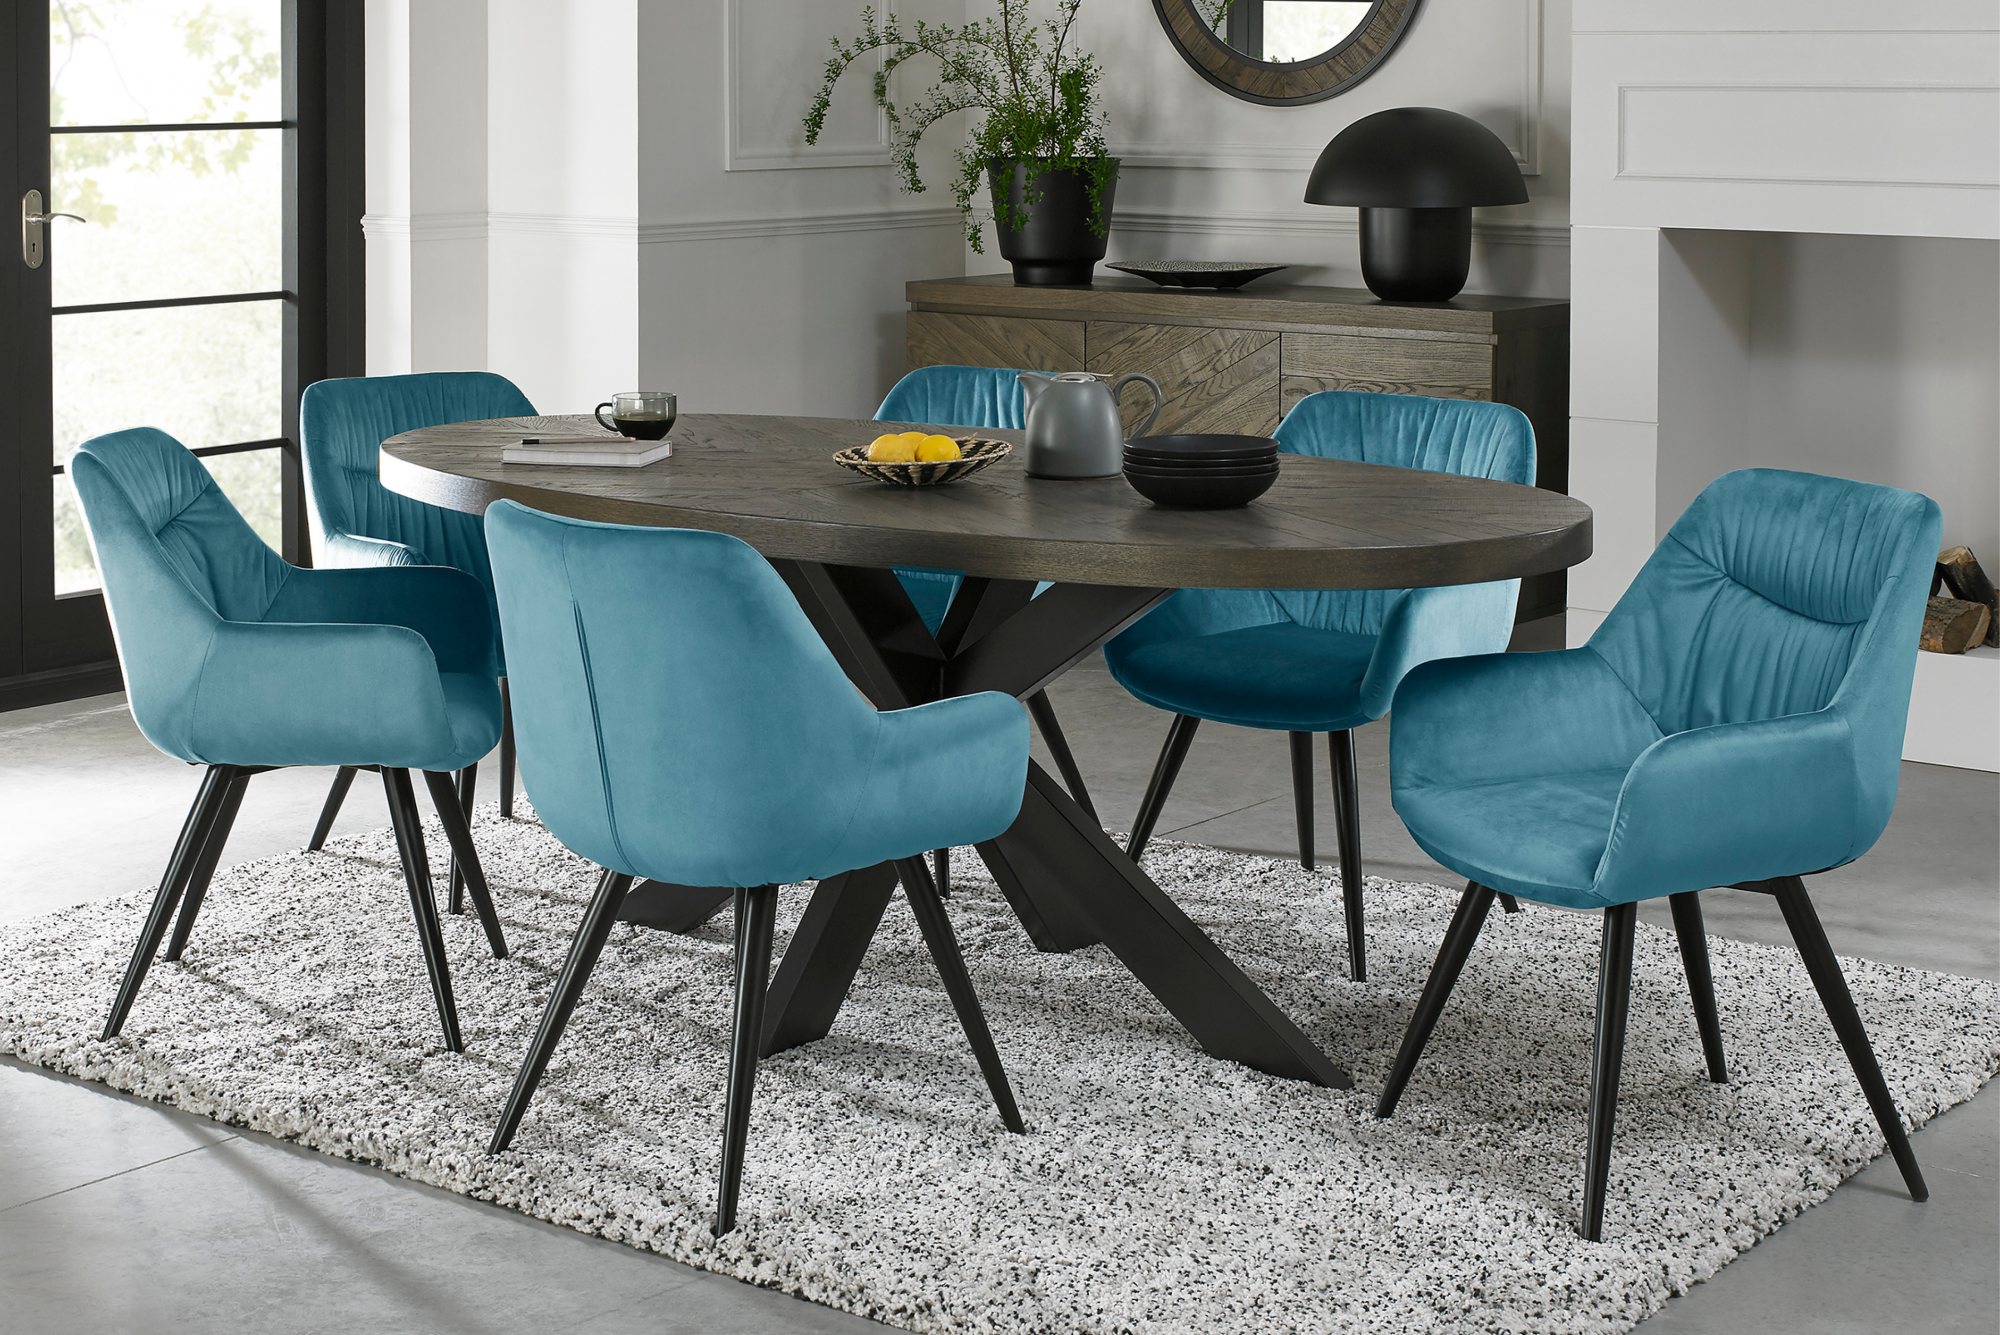 Home Origins Bosco fumed oak 6 seater dining table with 6 Dali chairs- petrol blue velvet fabric